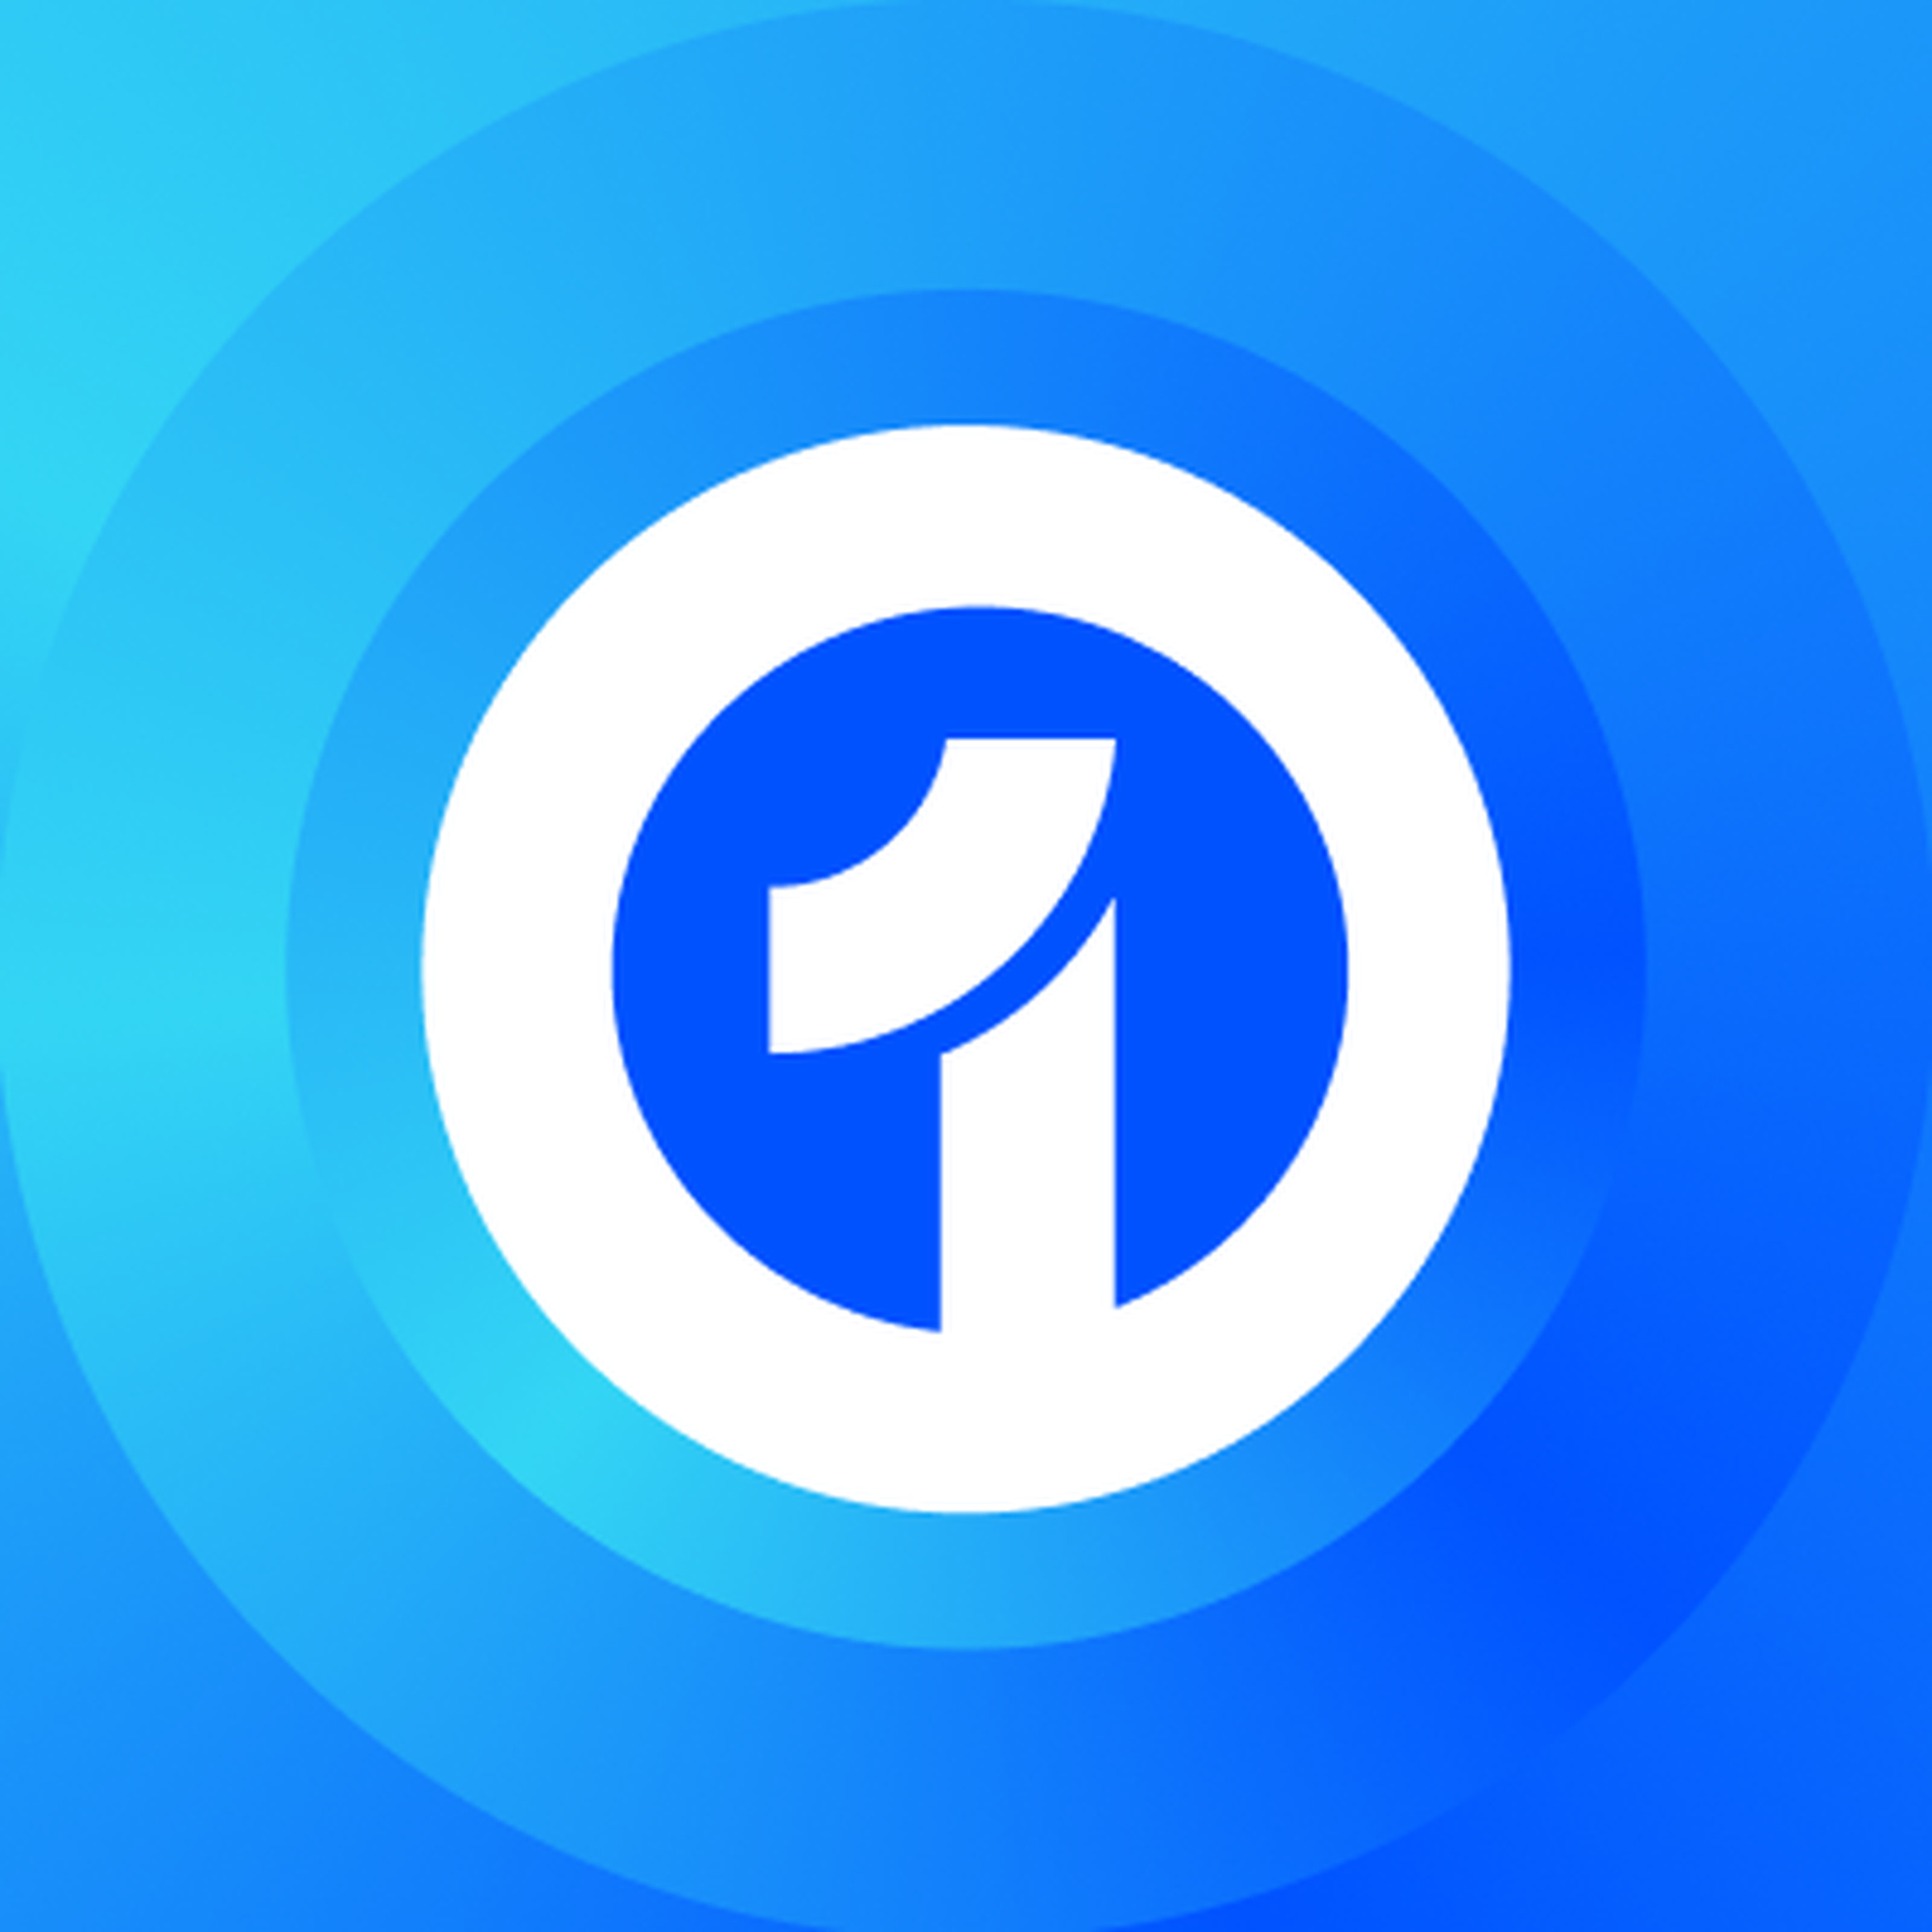 The Coinbase One logo features concentric circles filled with blue gradients and a stylized number “1”